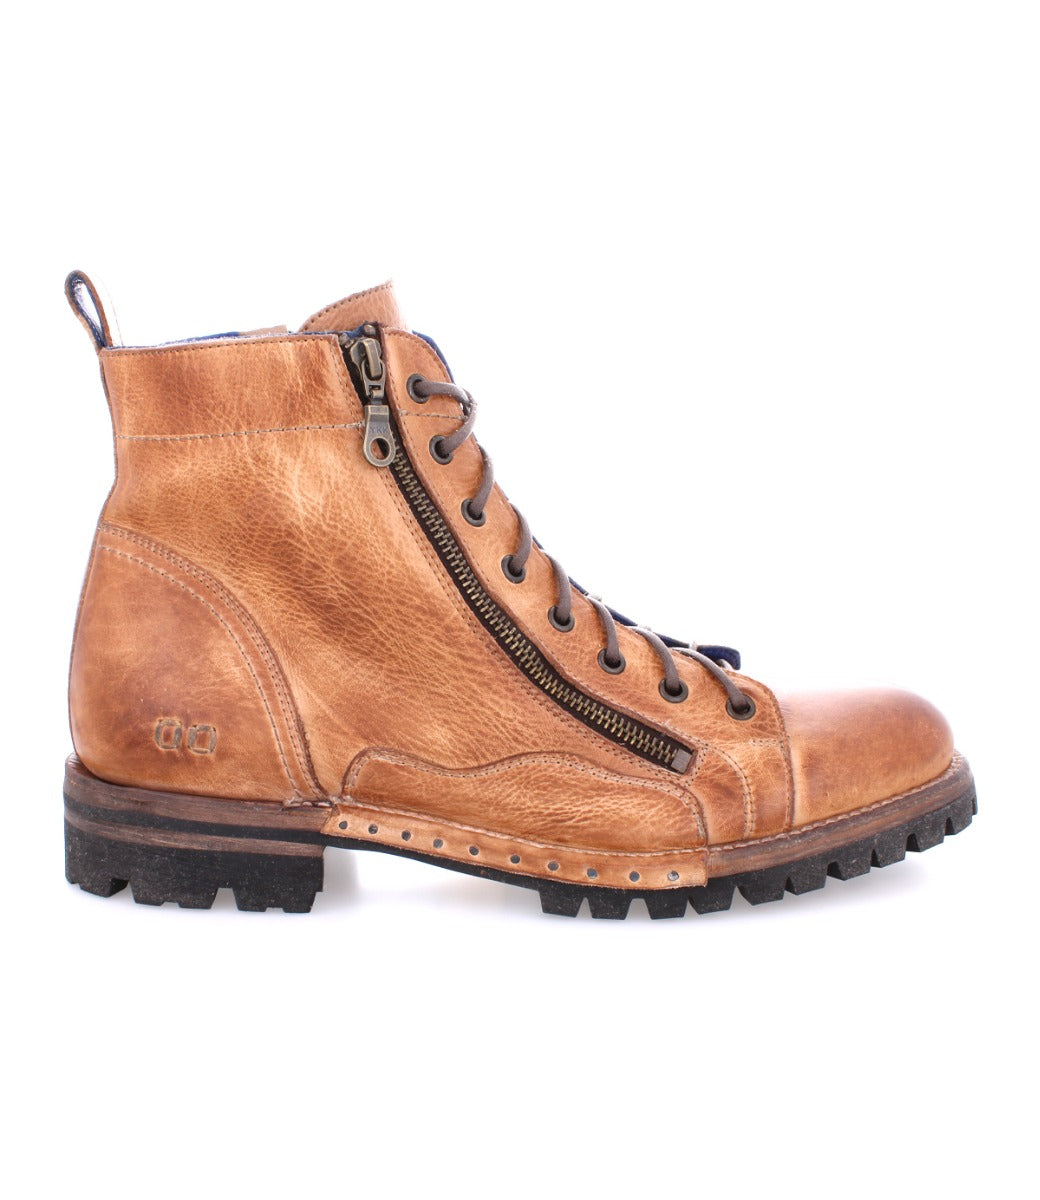 An Old Bowen Trek men's brown leather boot with a zipper on the side by Bed Stu.